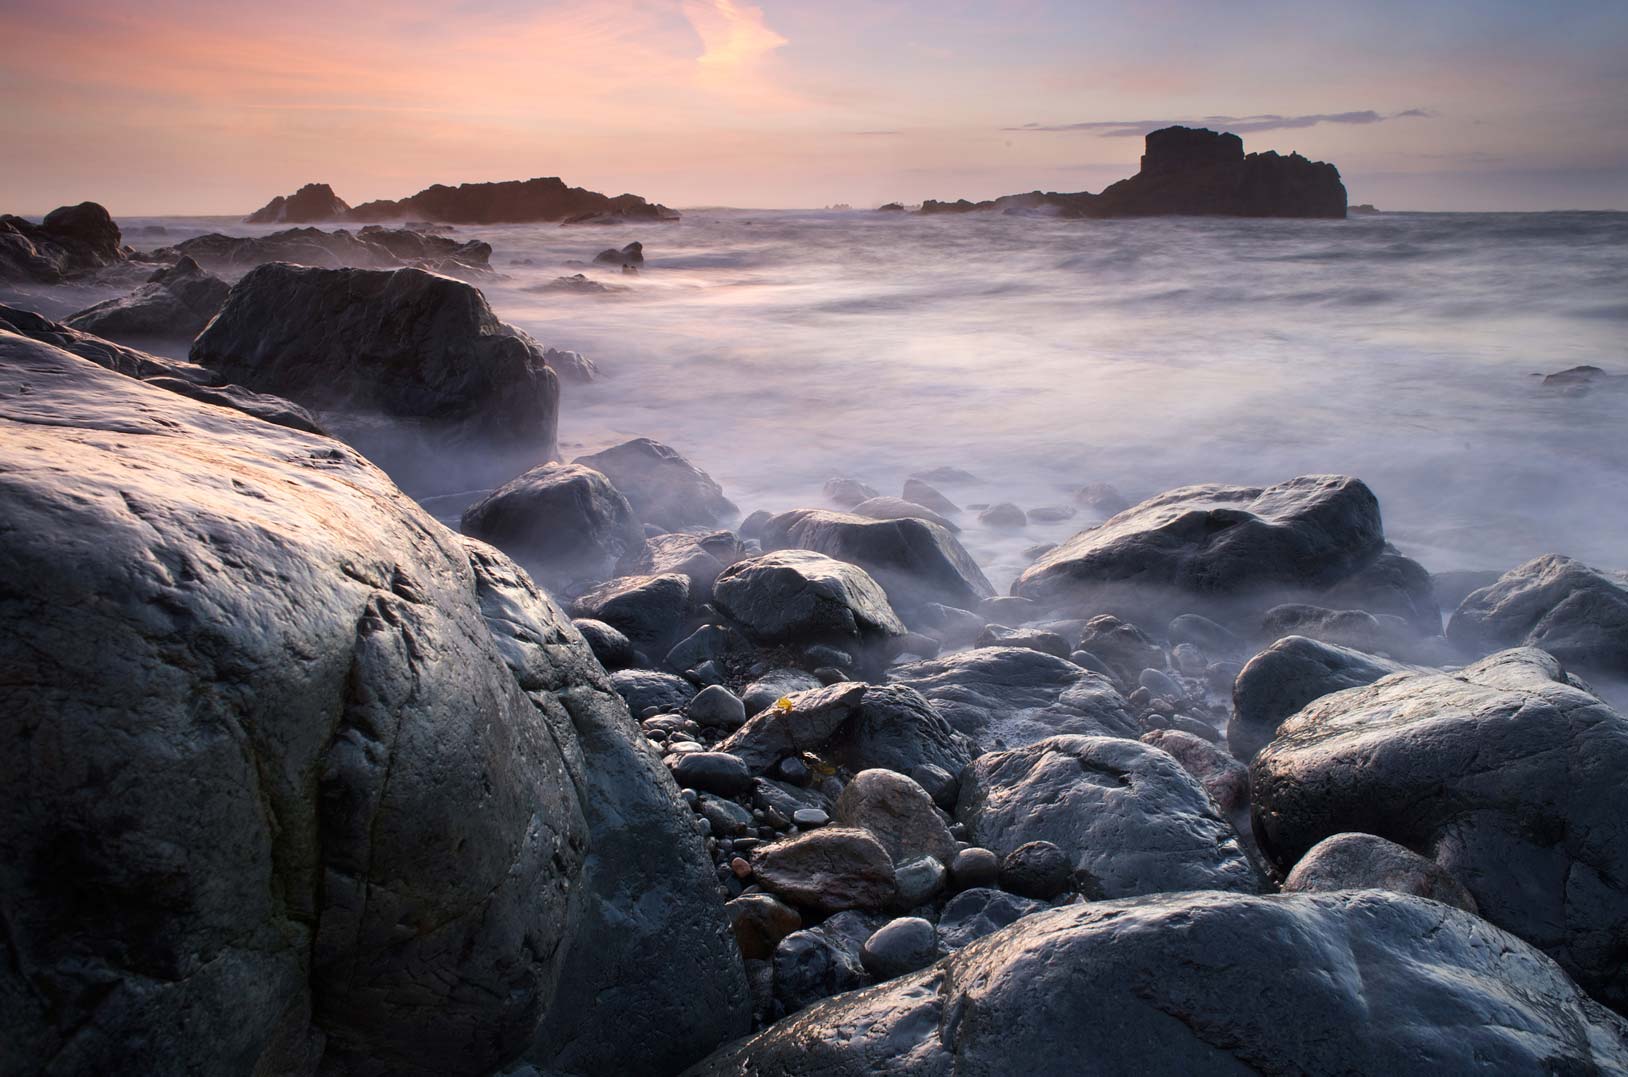 Seascape landscape image with rocks in the foreground